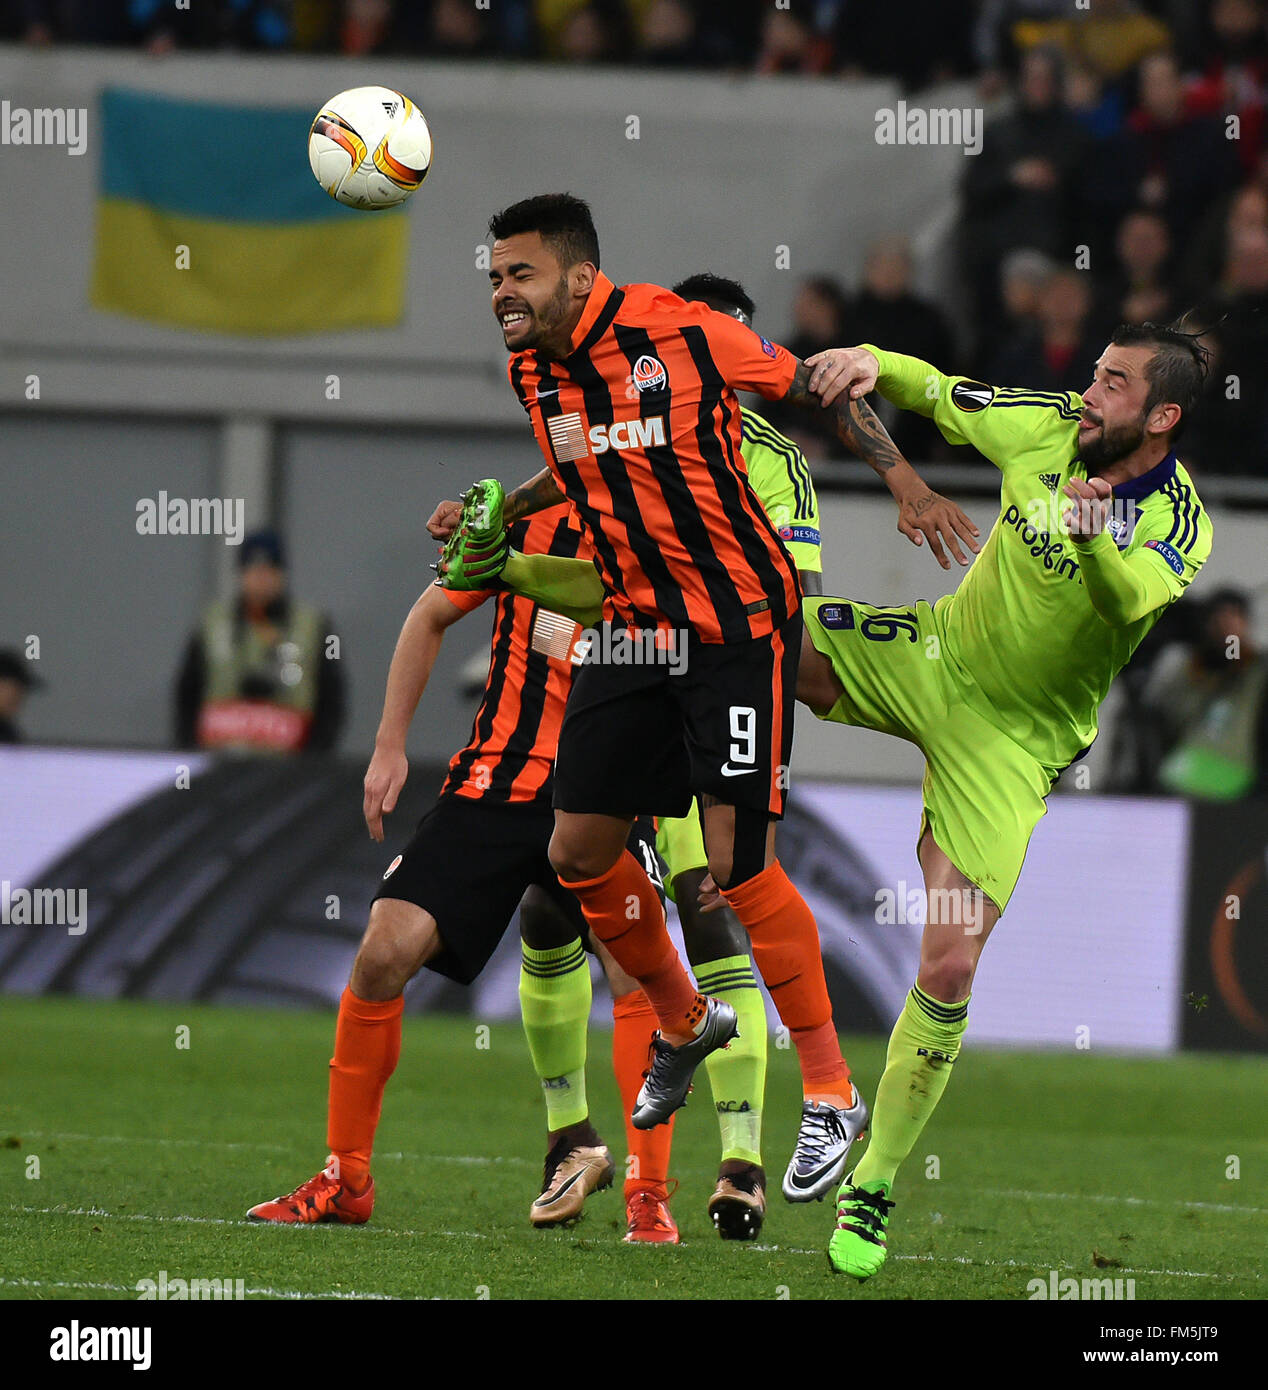 Lviv, Ukraine. 10th March, 2016. Dentinho (L) of Shakhtar vies for the ball with Steven Defour (R) of Anderlecht during the UEFA Europa League round of 16, first leg soccer match between Shakhtar Donetsk and Anderlecht at the Arena Lviv stadium in Lviv, Ukraine, 10 March 2016. Credit:  Mykola Tys/Alamy Live News Stock Photo